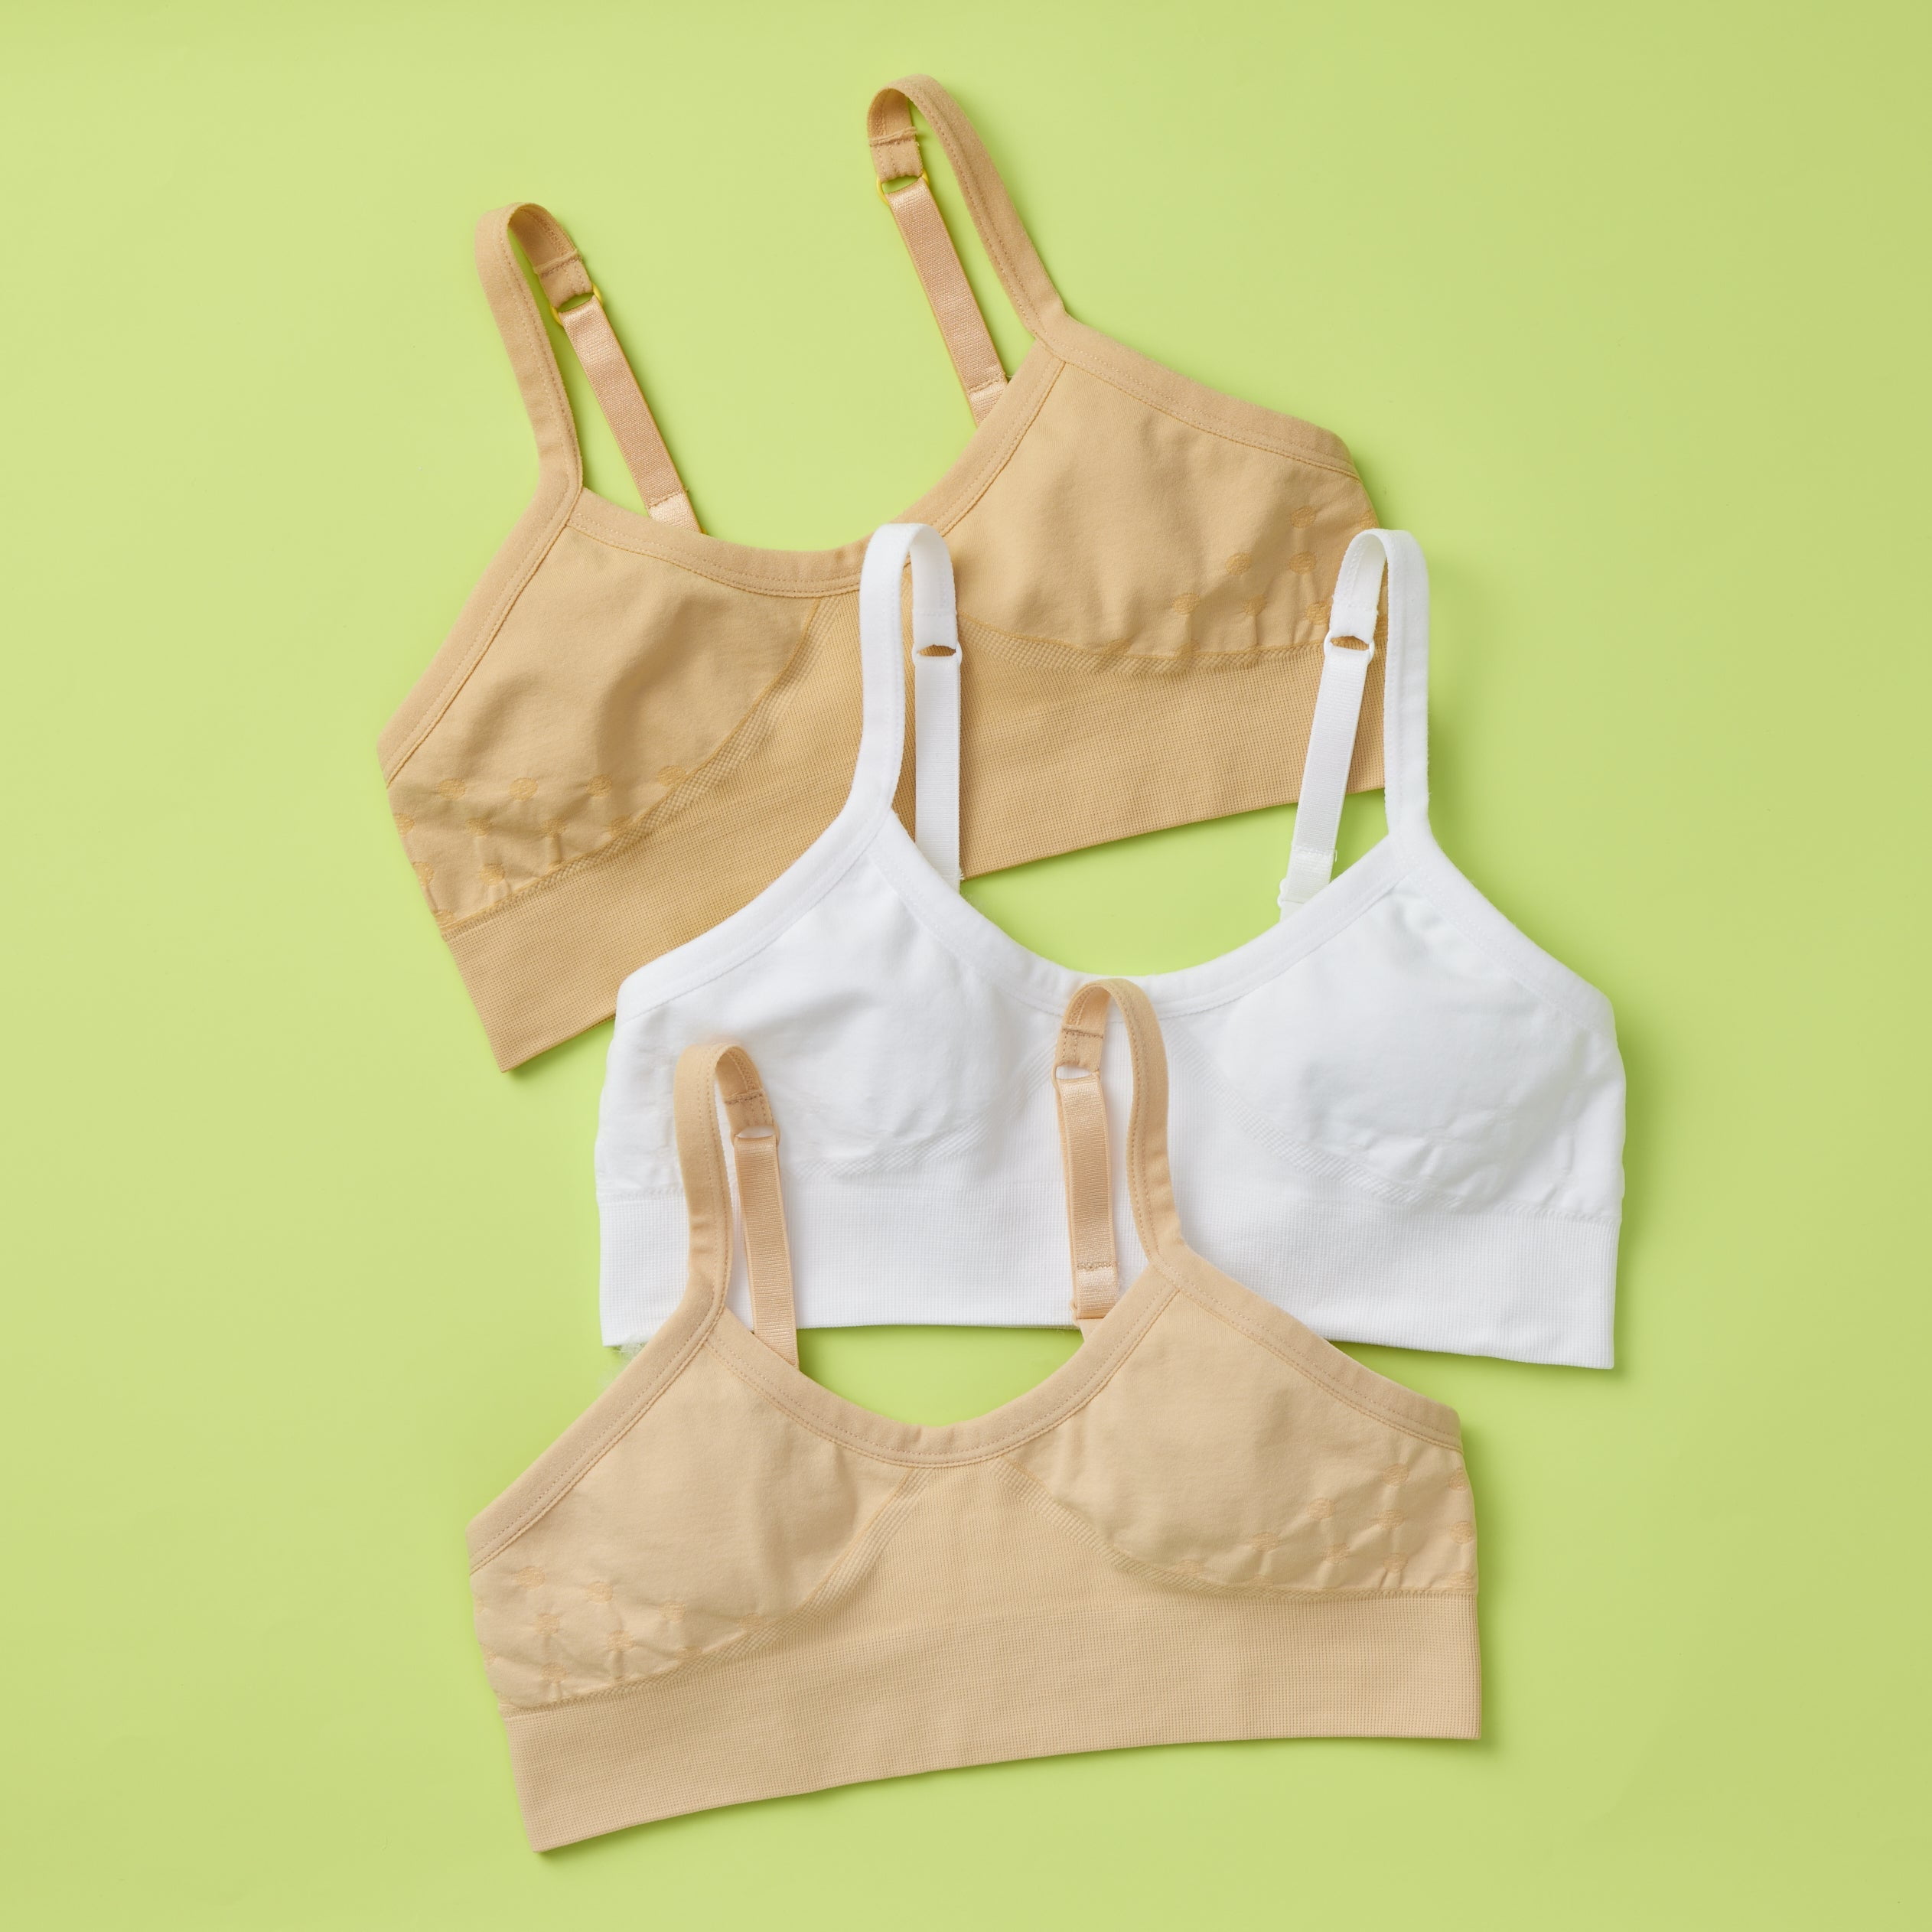 The Original Yellowberry Girls First Training Bra with Ultimate